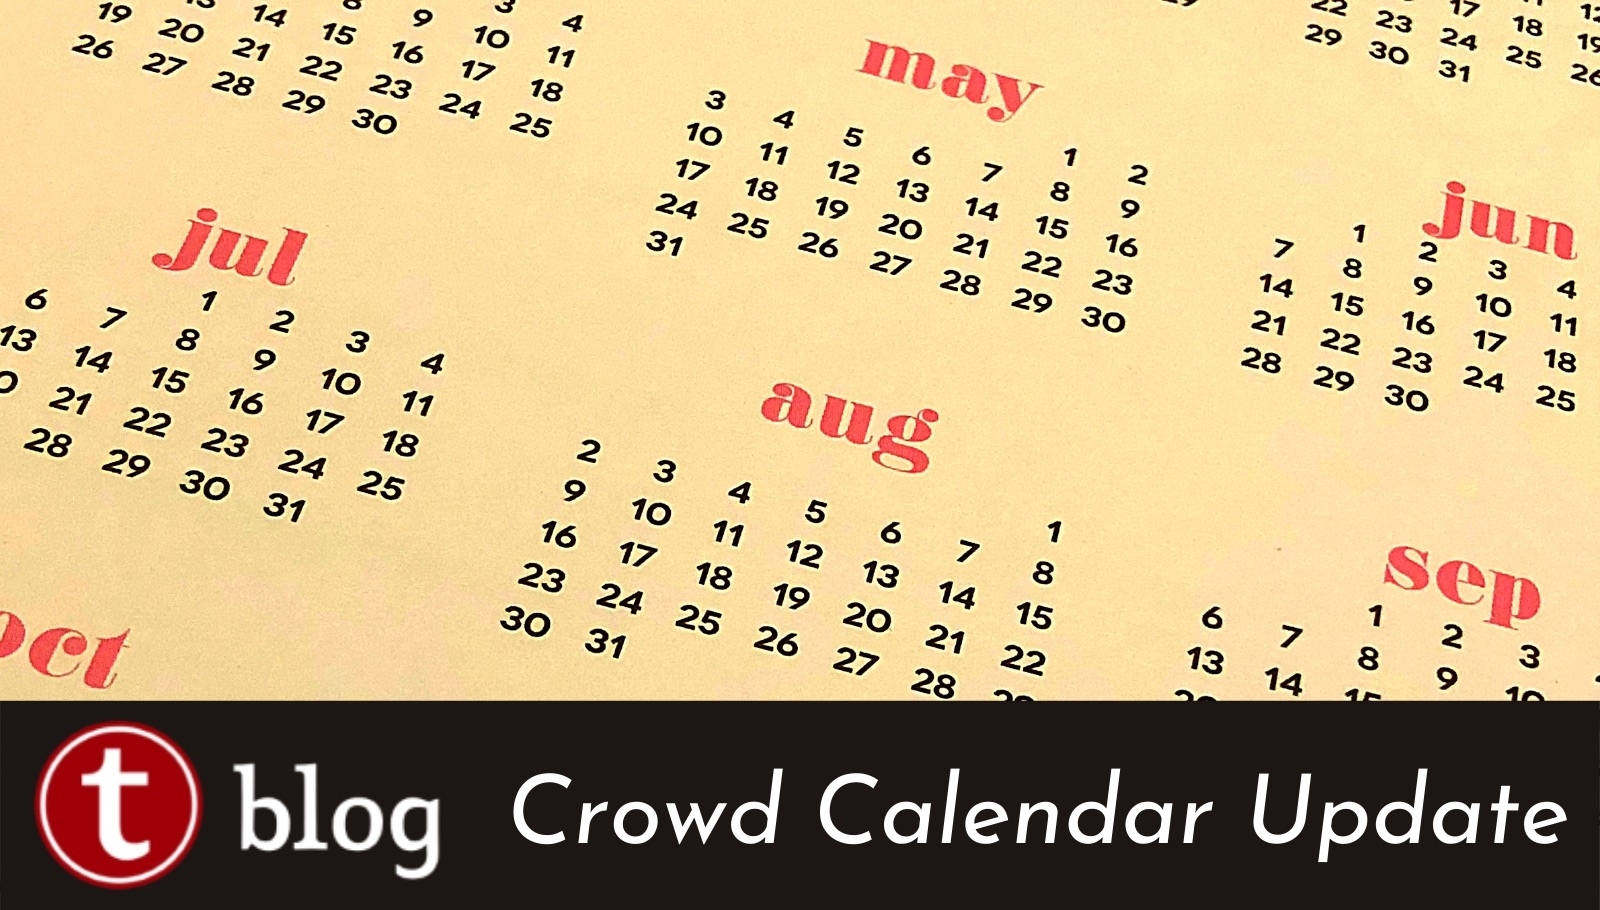 Crowd Calendars And Wait Times - Touring Plans - Touringplans Discussion Forums November 2021 Disney World Crowd Calendar